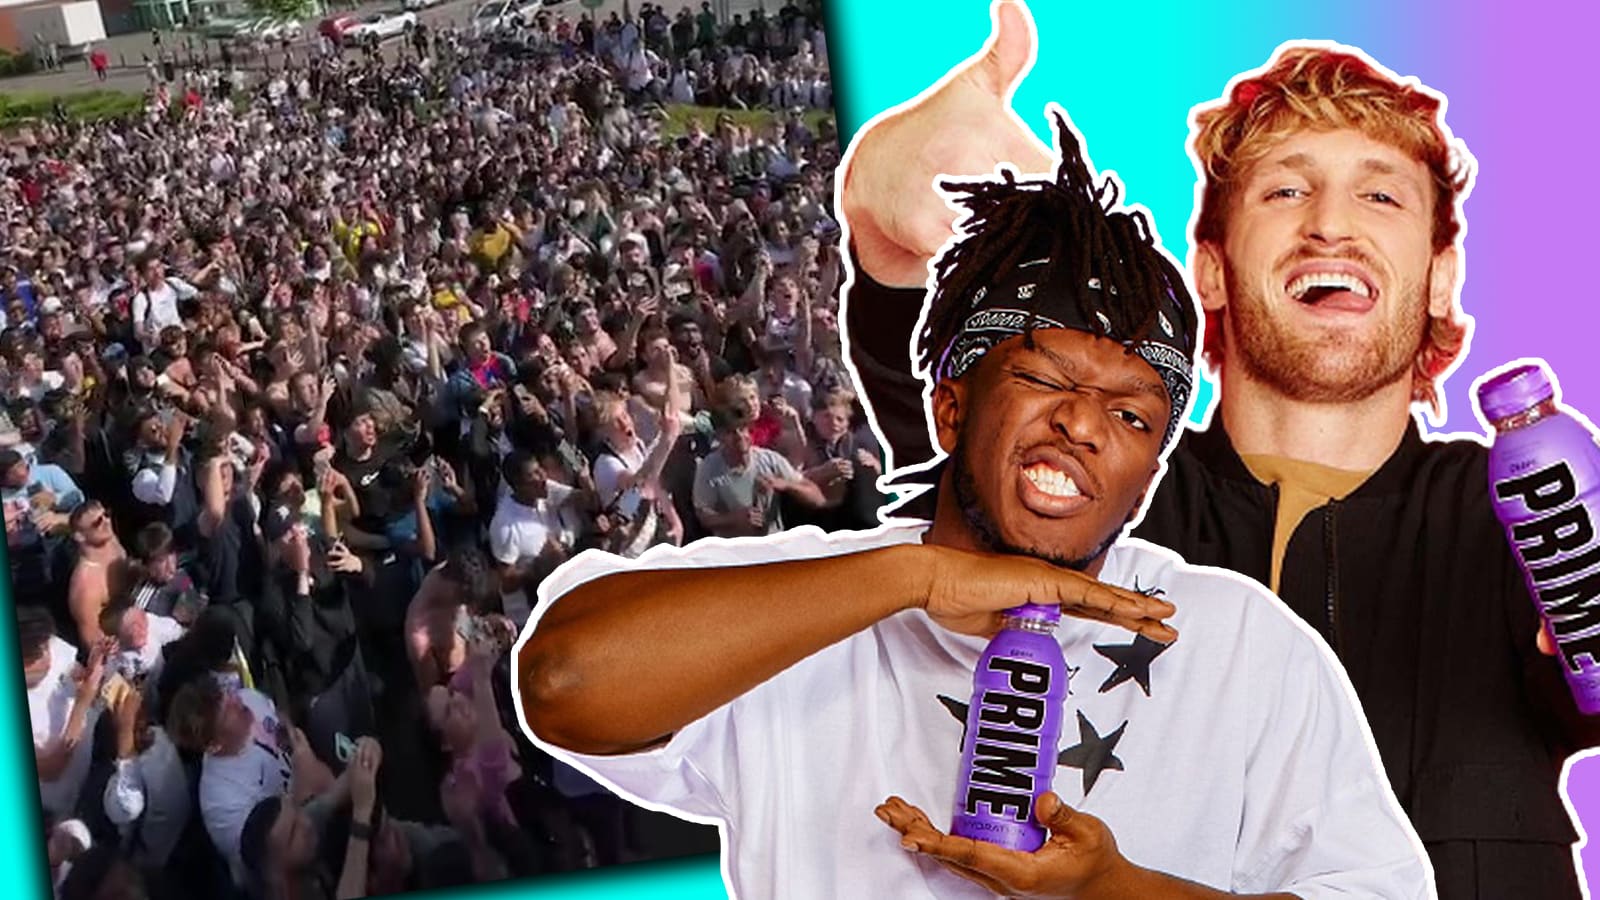 KSI and Logan Paul reveal astronomical Prime fortune they've made in just  one year after energy drink mania